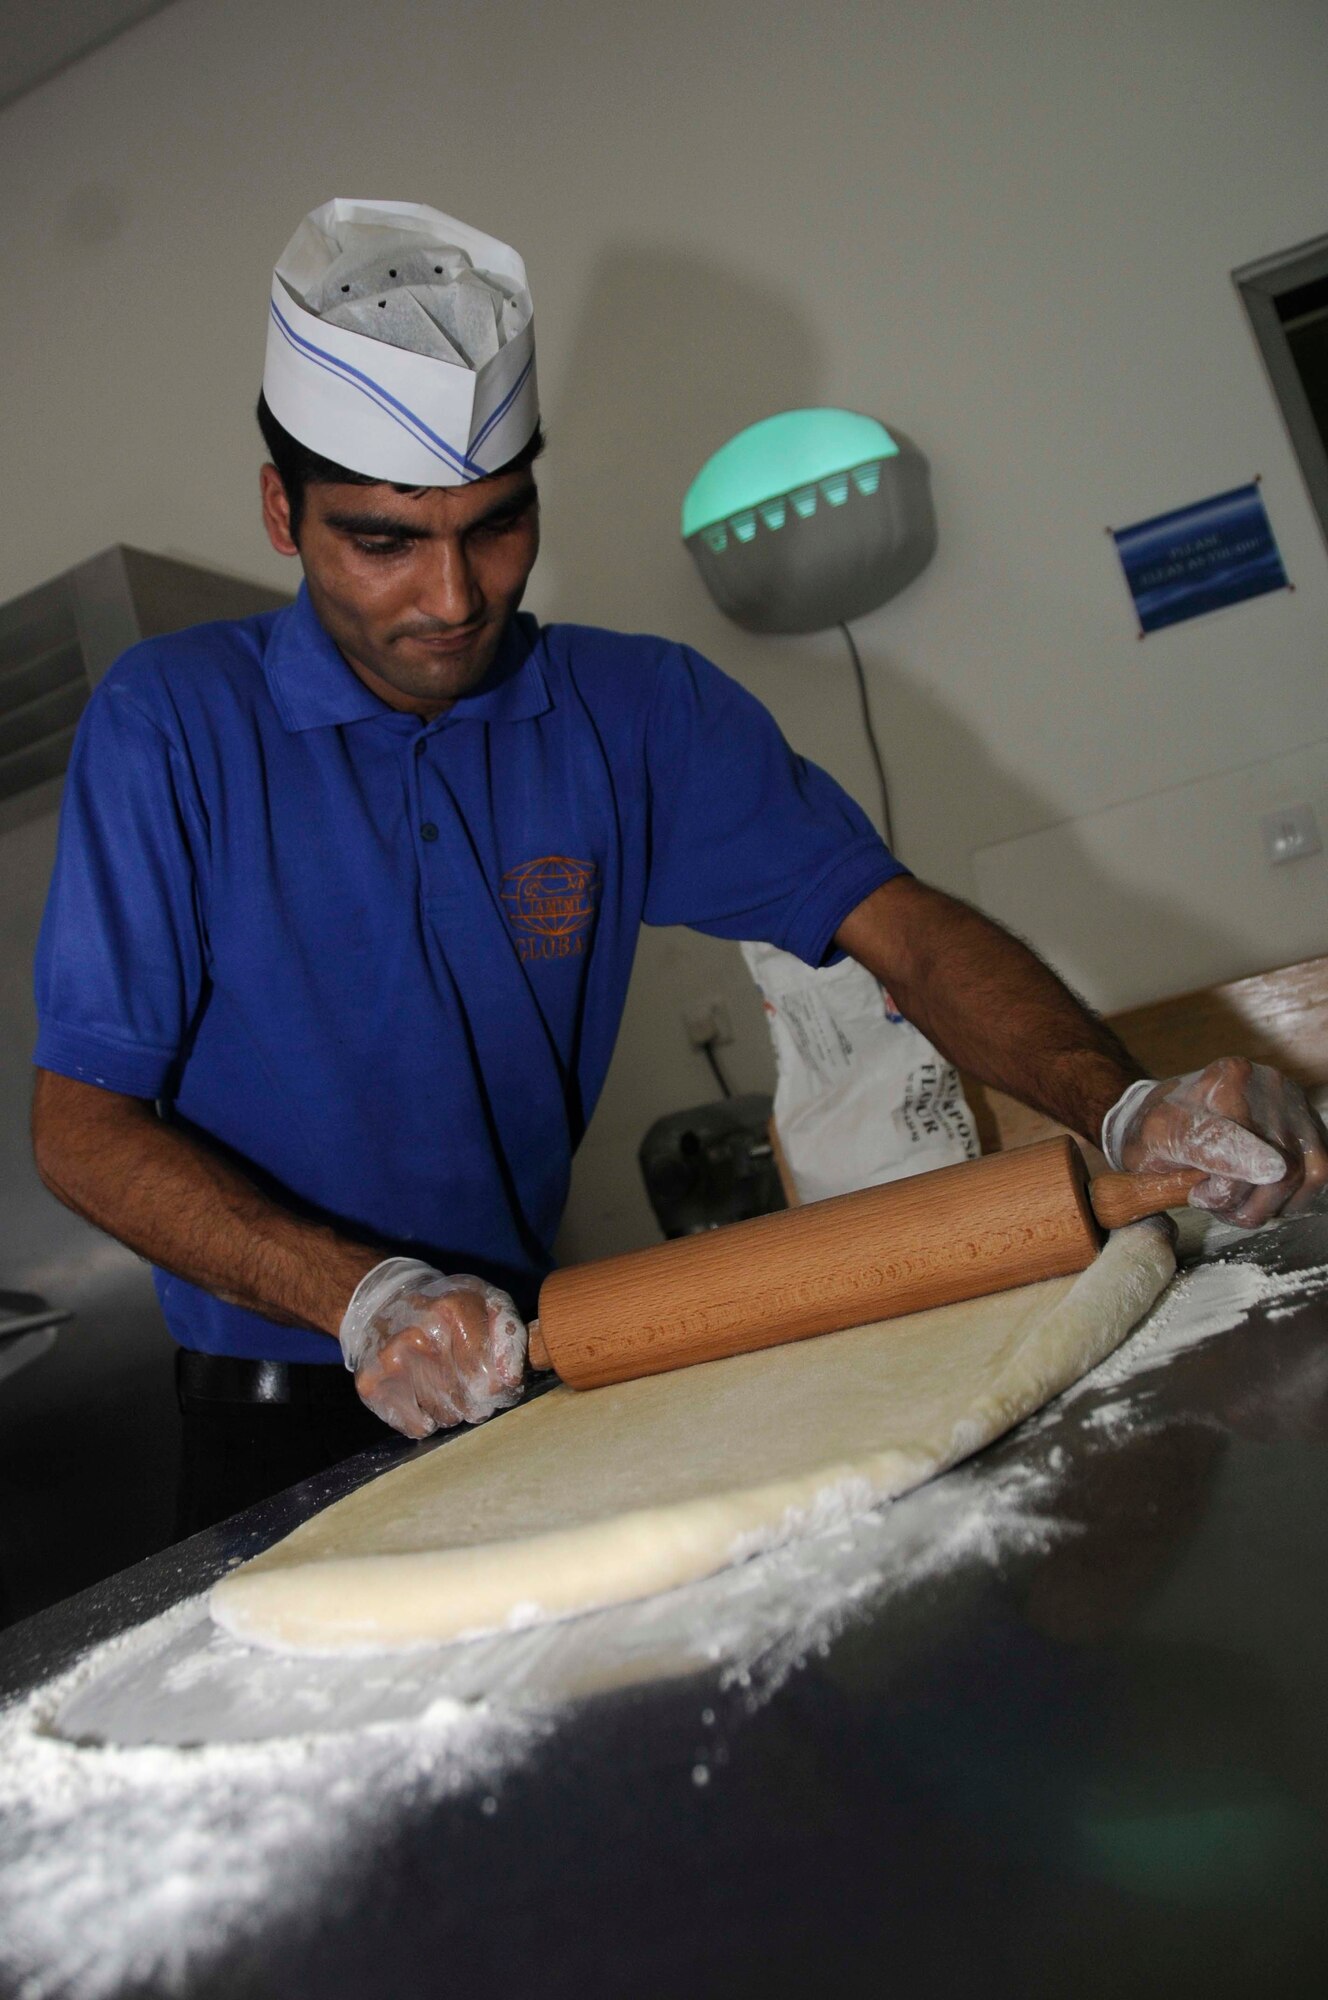 Chandra Acharya uses a rolling pin to roll flour into dough to make pecan rolls at a dining facility Aug. 5, at an undisclosed location in Southwest Asia. (U.S. Air Force photo by Staff Sgt. Darnell T. Cannady)